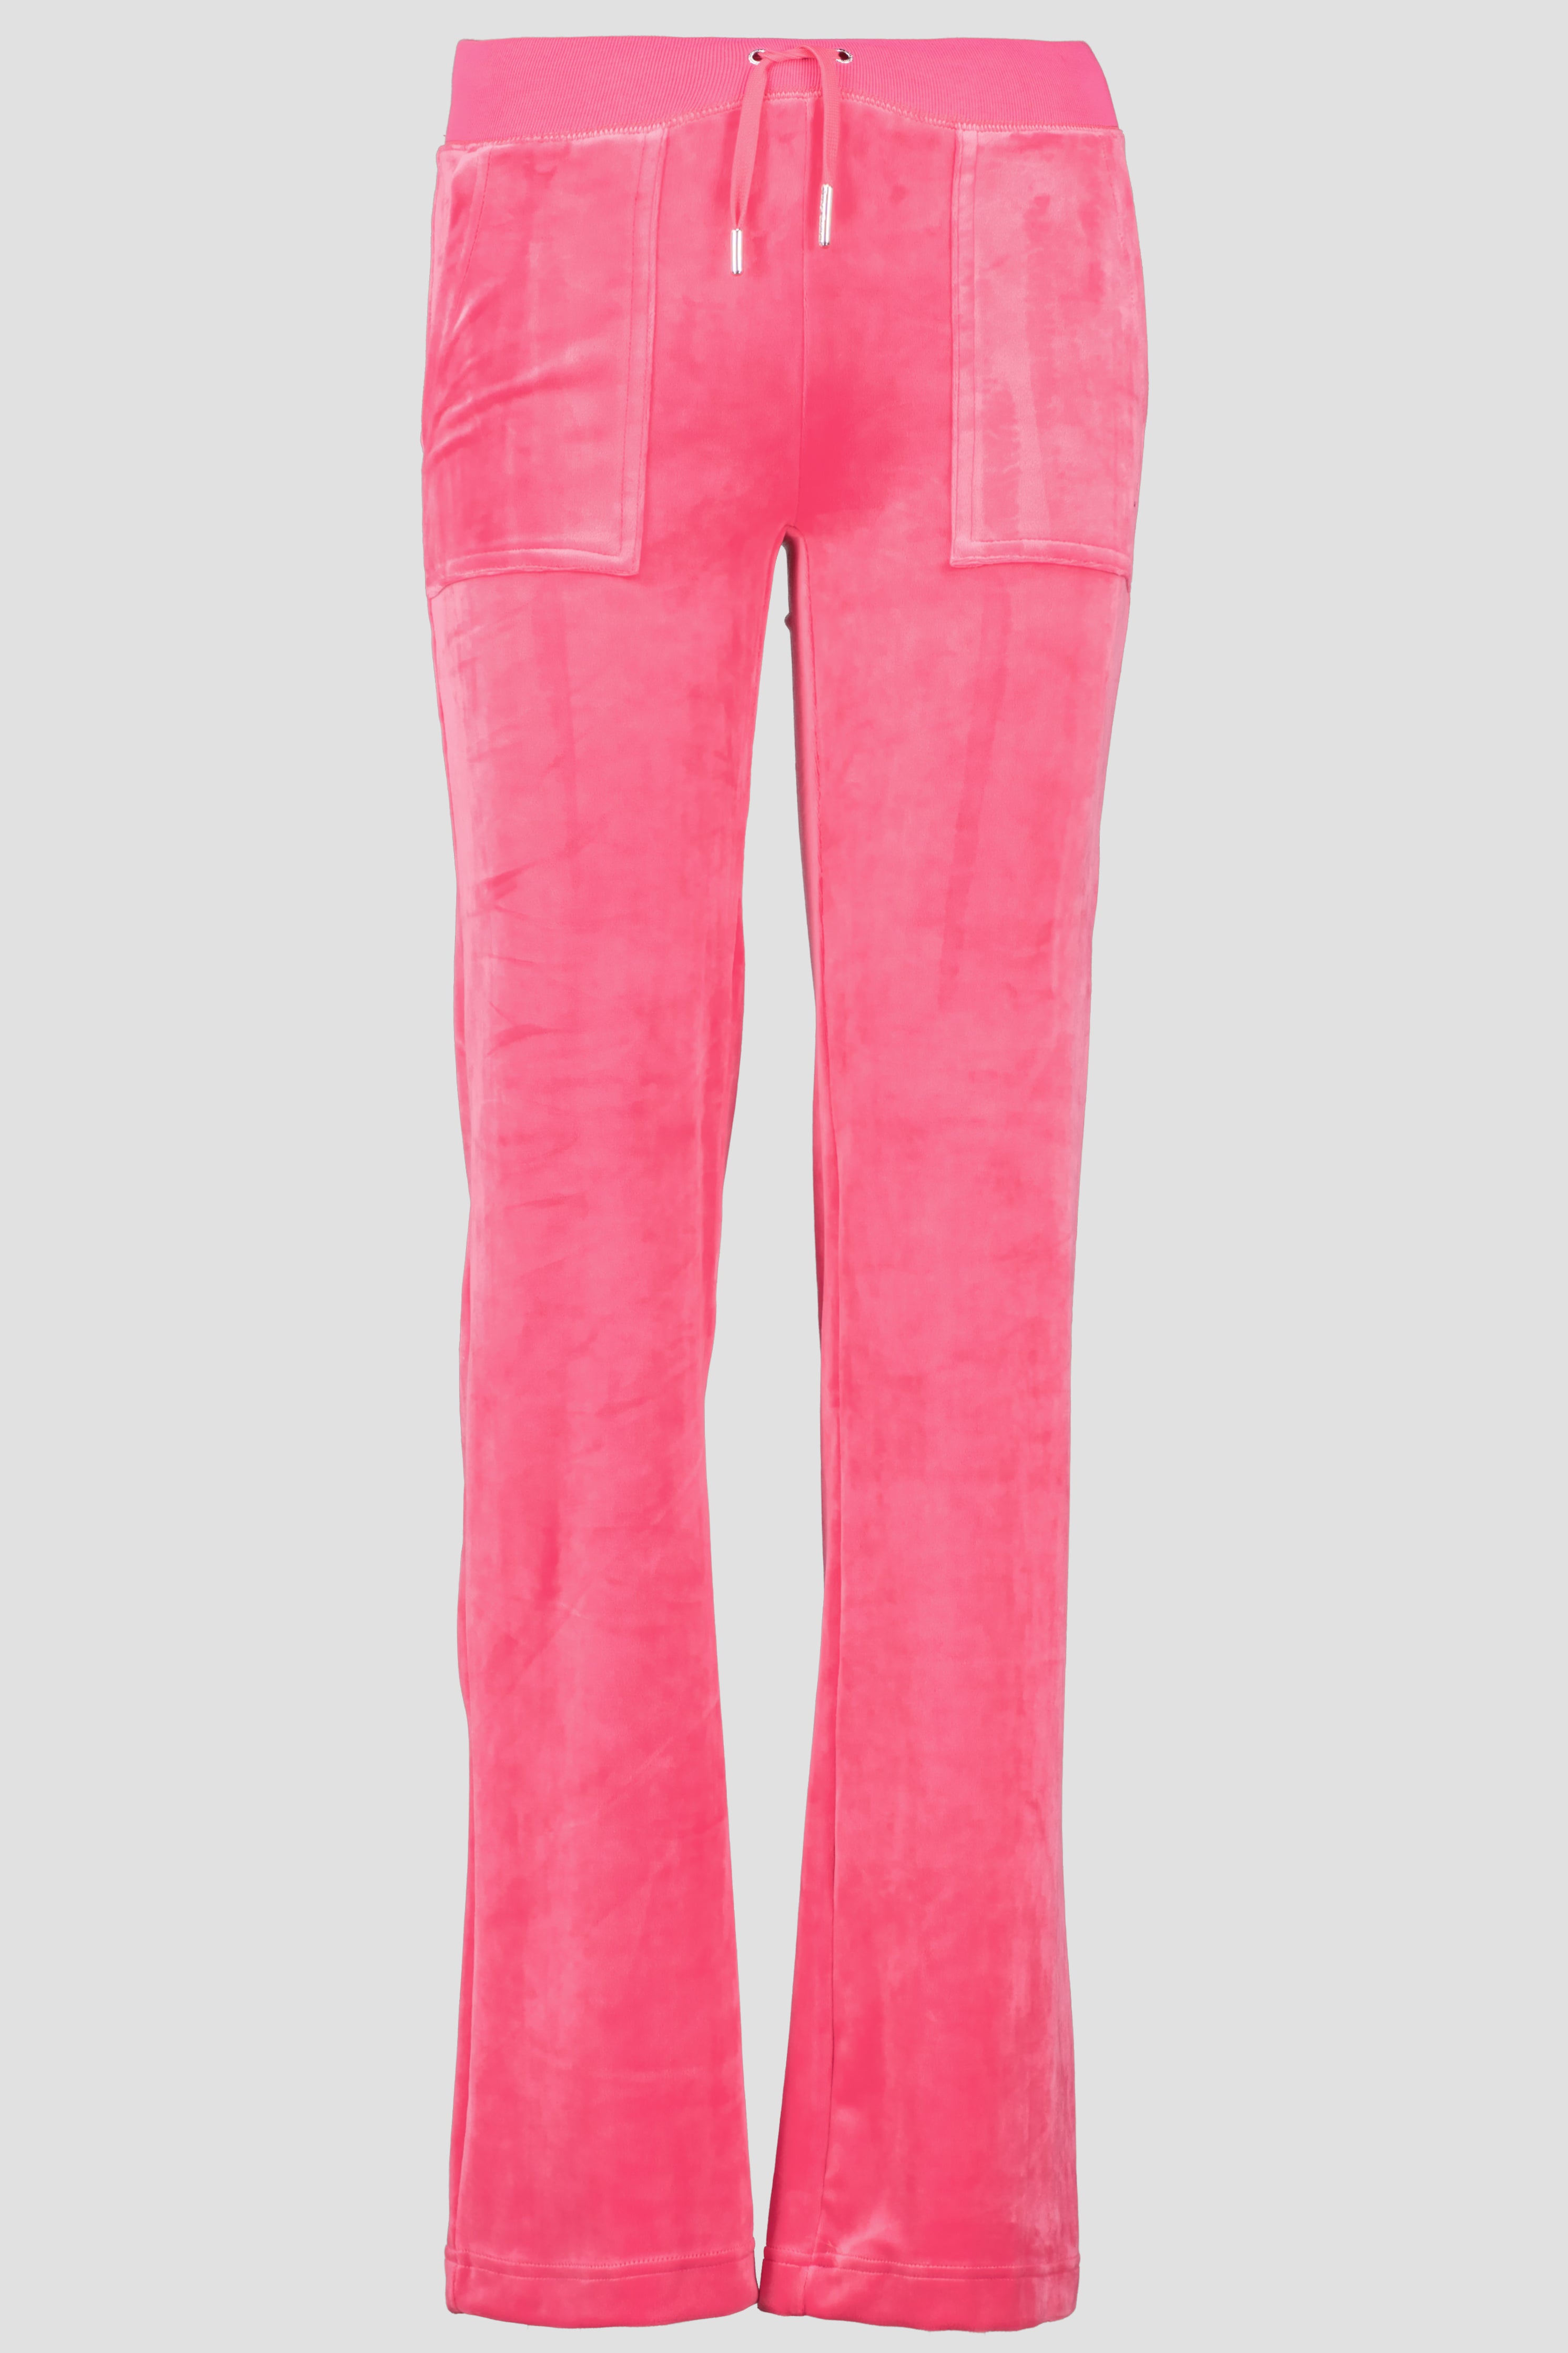 Women's Juicy Couture Del Ray Raspberry Rose Straight Leg Pant